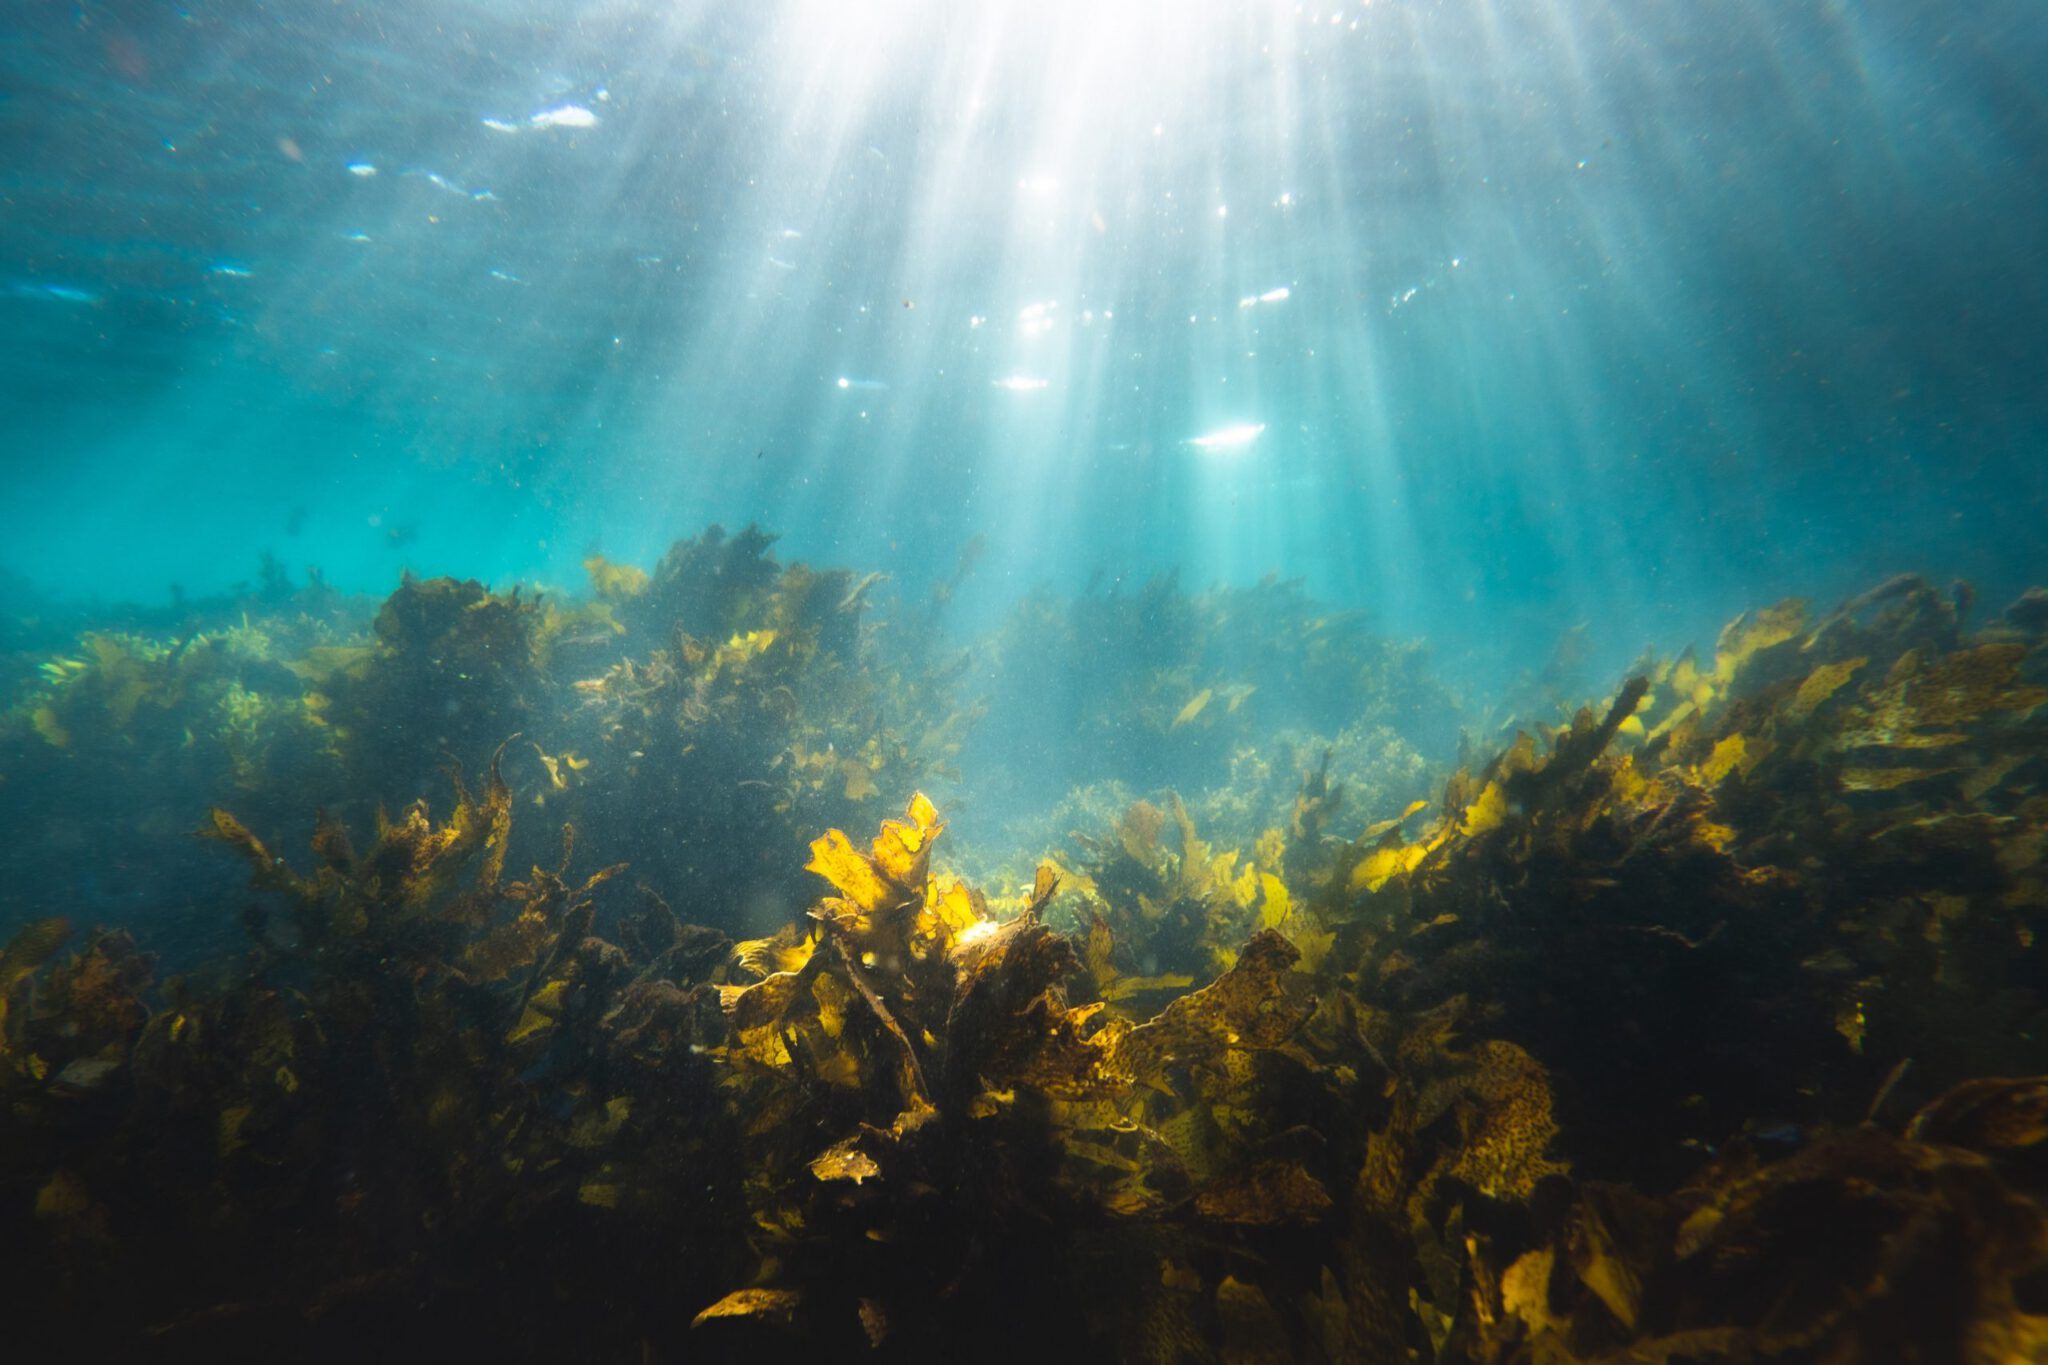 underwater park in La Jolla featuring coral reefs, kelp and the suns rays shining down through the water